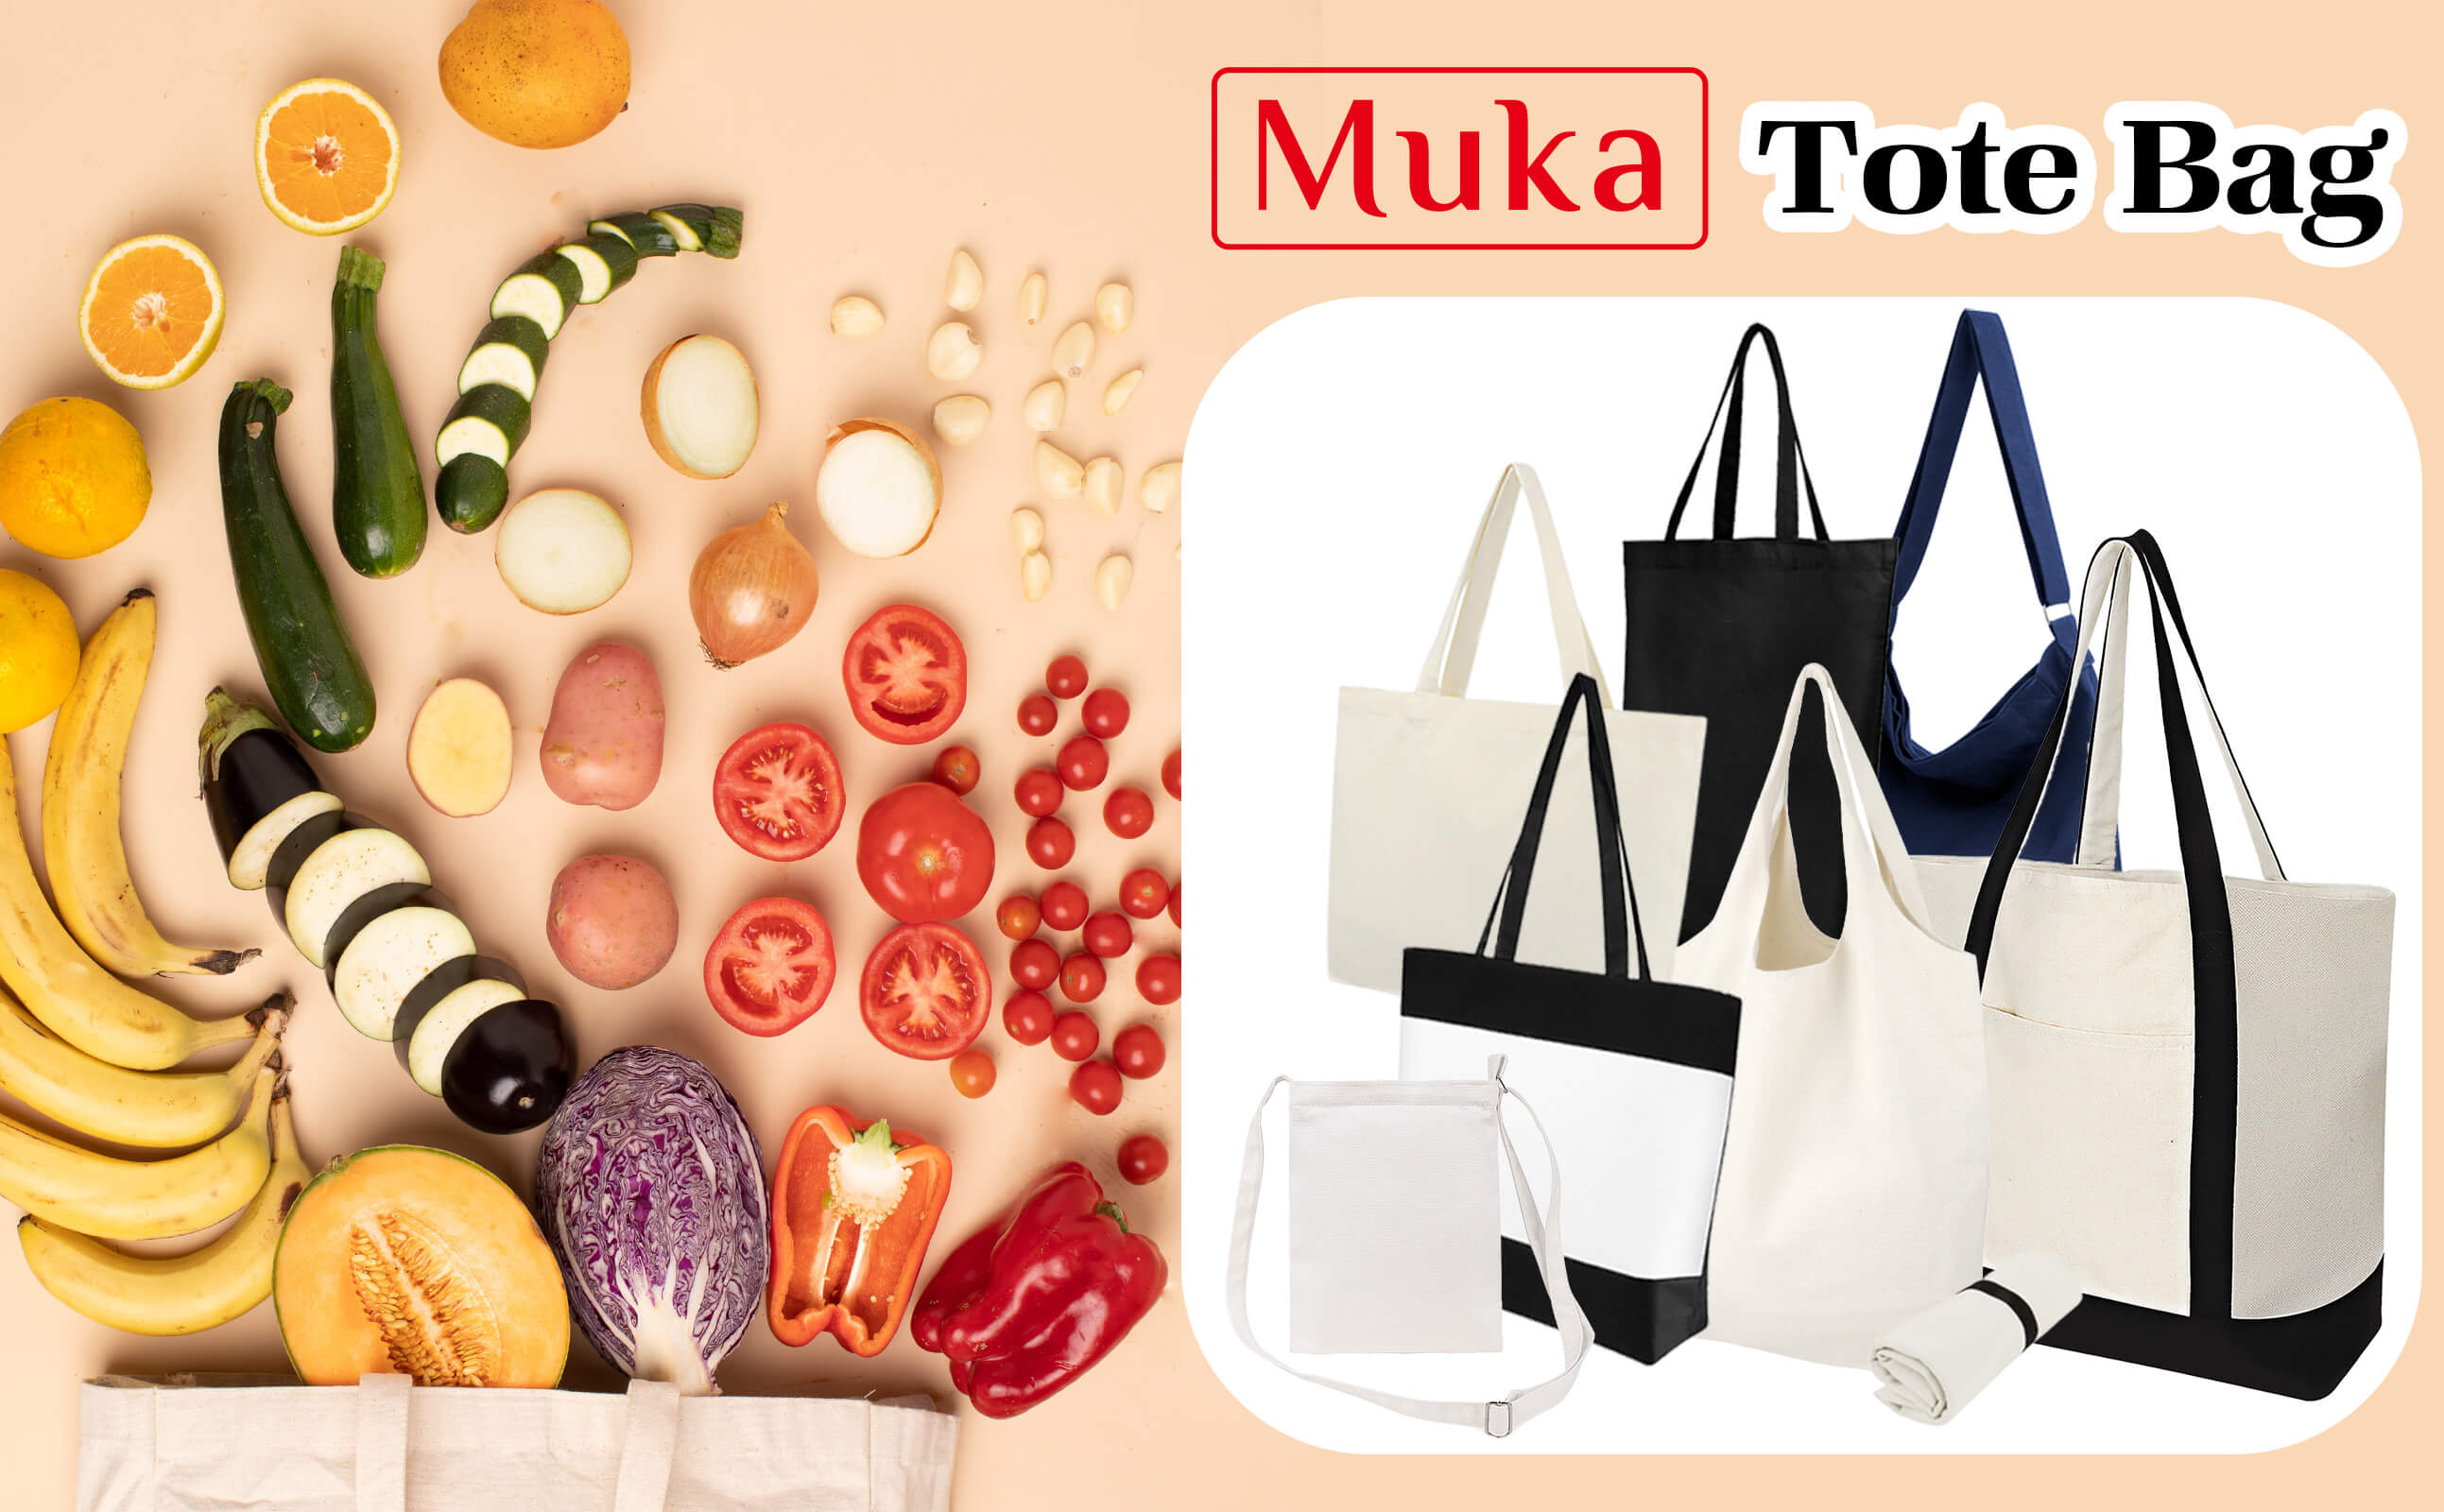 Muka Tote Bag, Heavy Duty Cotton Canvas Bags with Bottom Gusset, 16 x 12 x 4 Inch